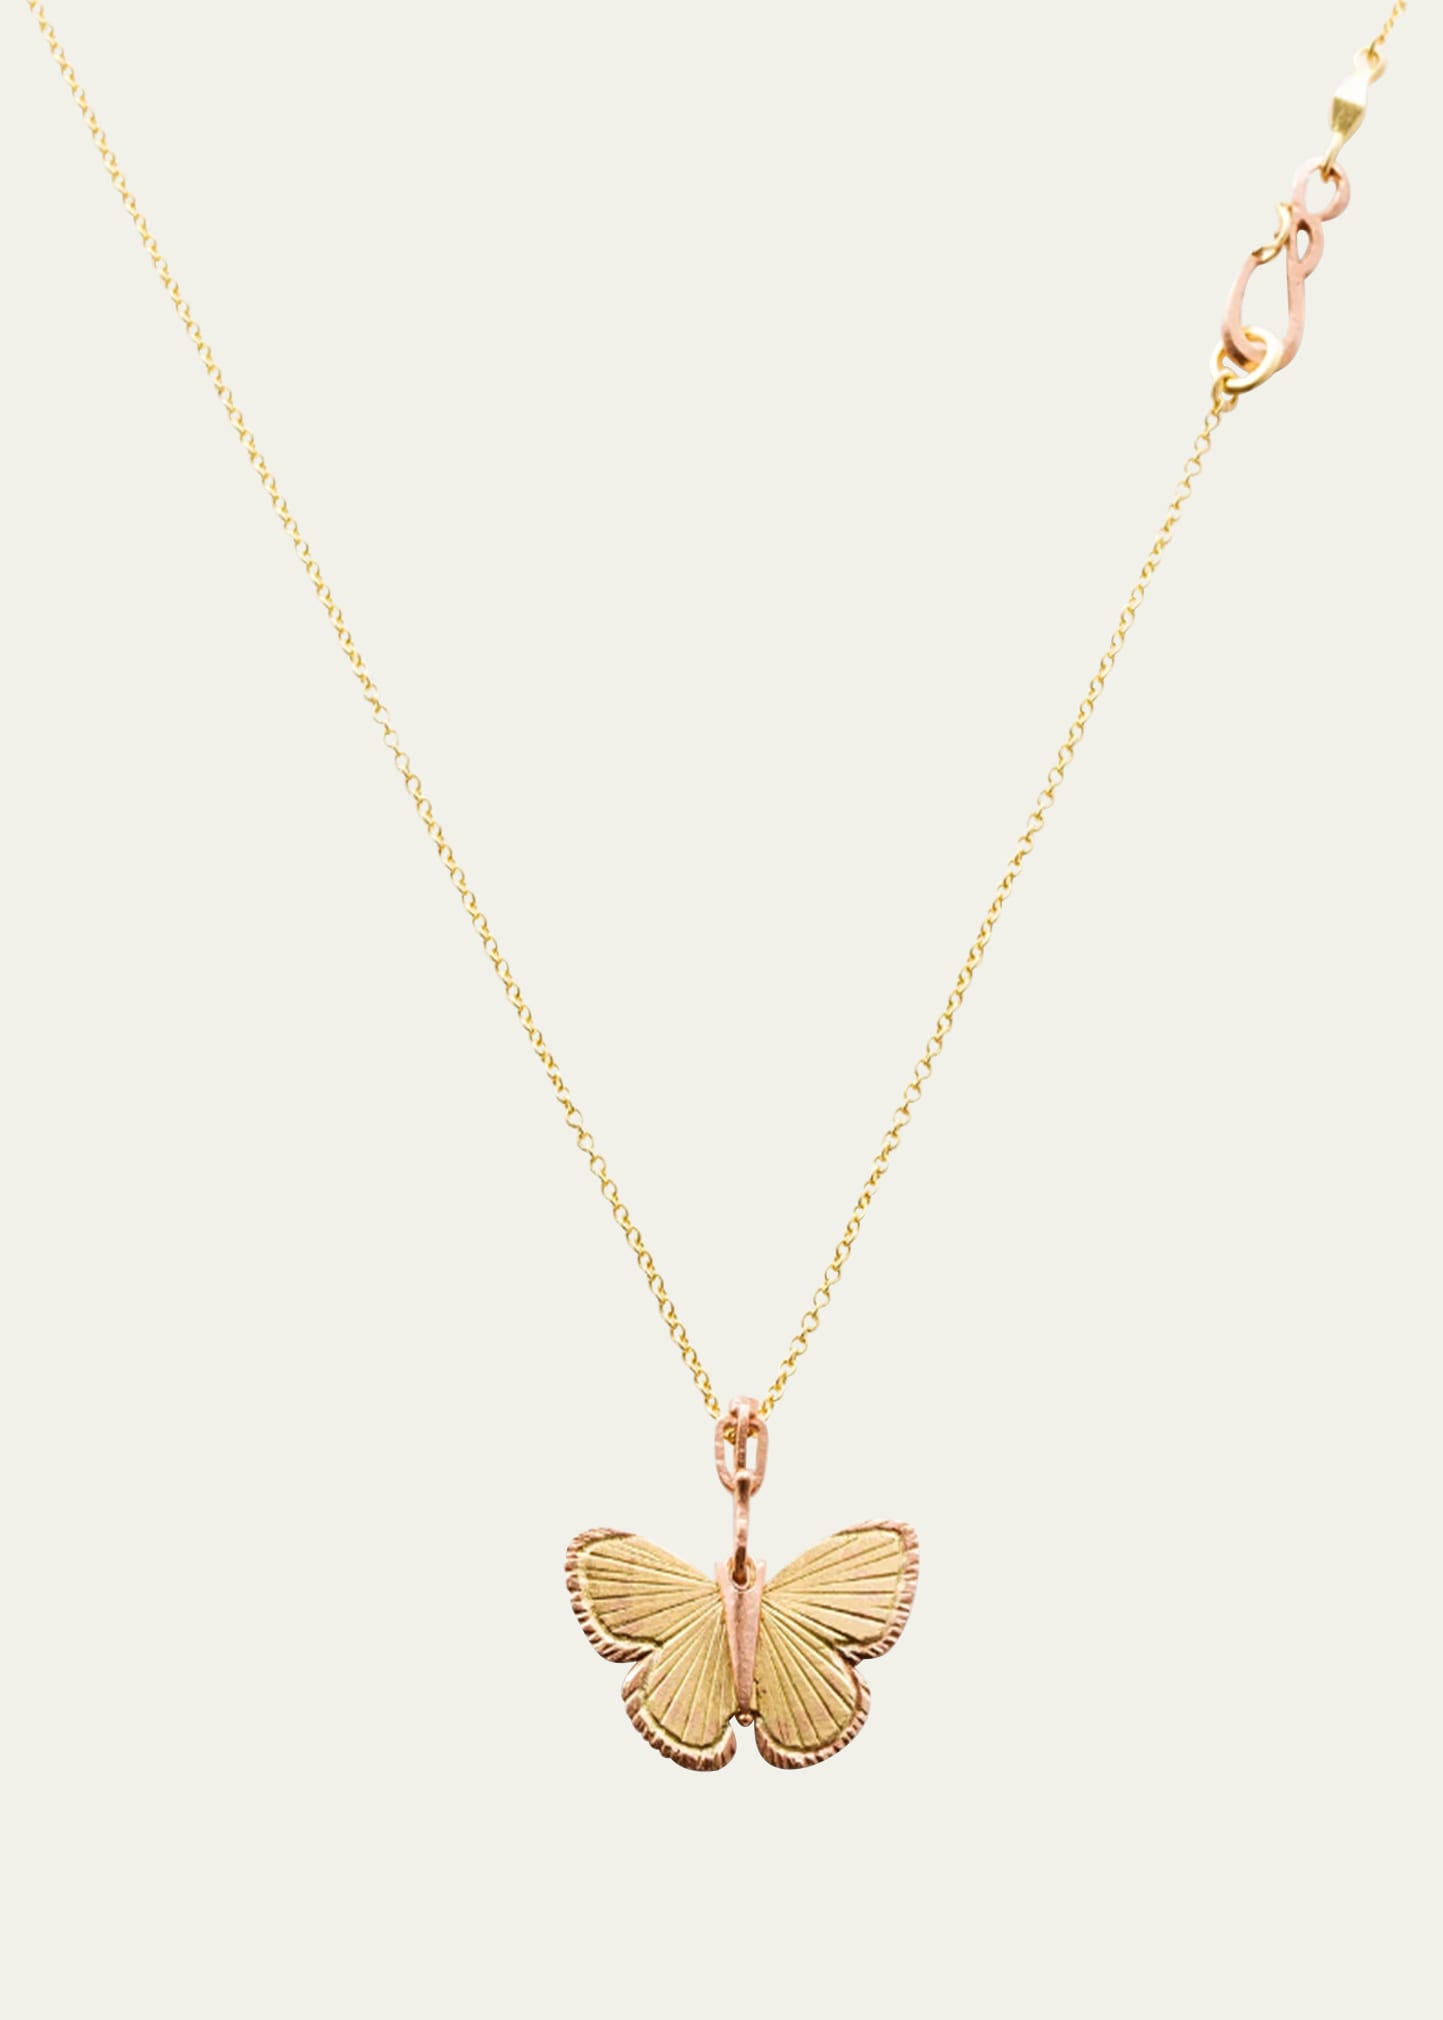 Palos Verde Necklace In 18K Yellow Gold and 14K Rose Gold